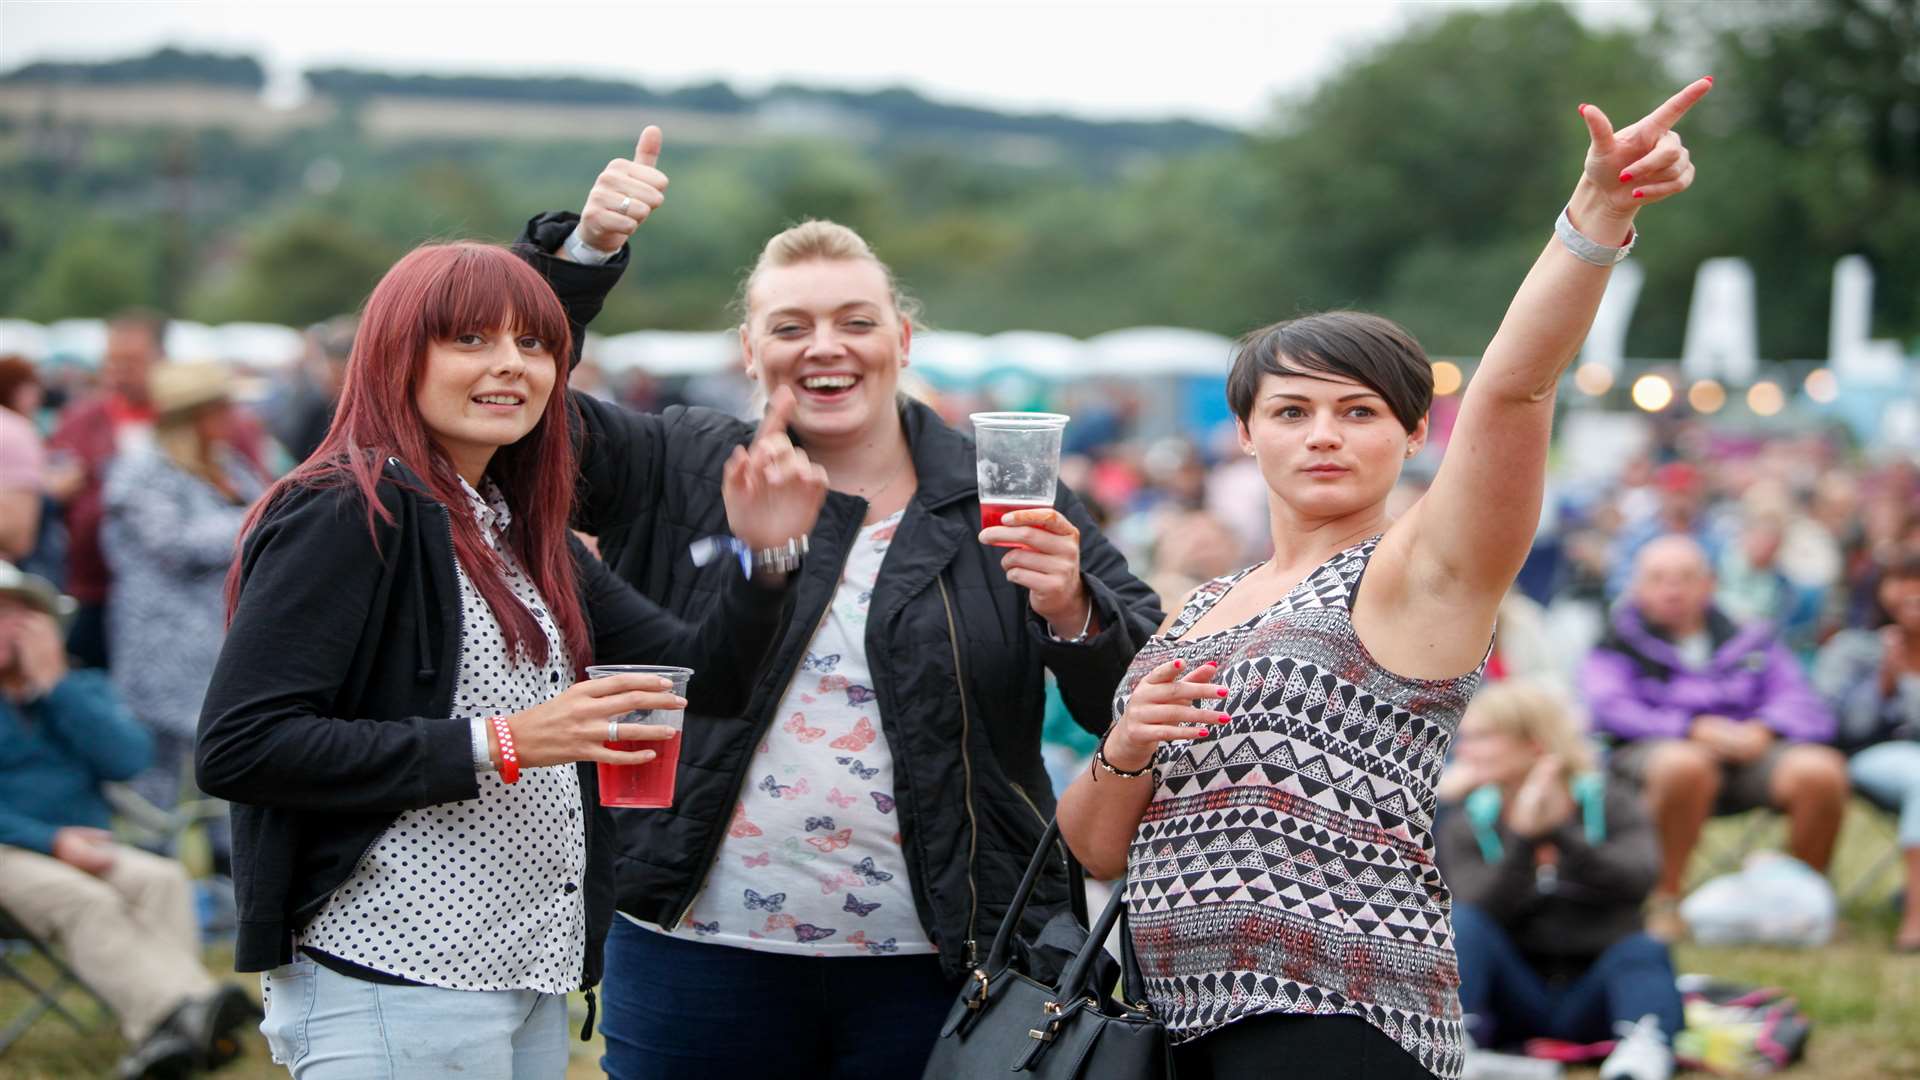 Make music and make merry like these fans at the Vicar's Picnic Music Festival in Yalding